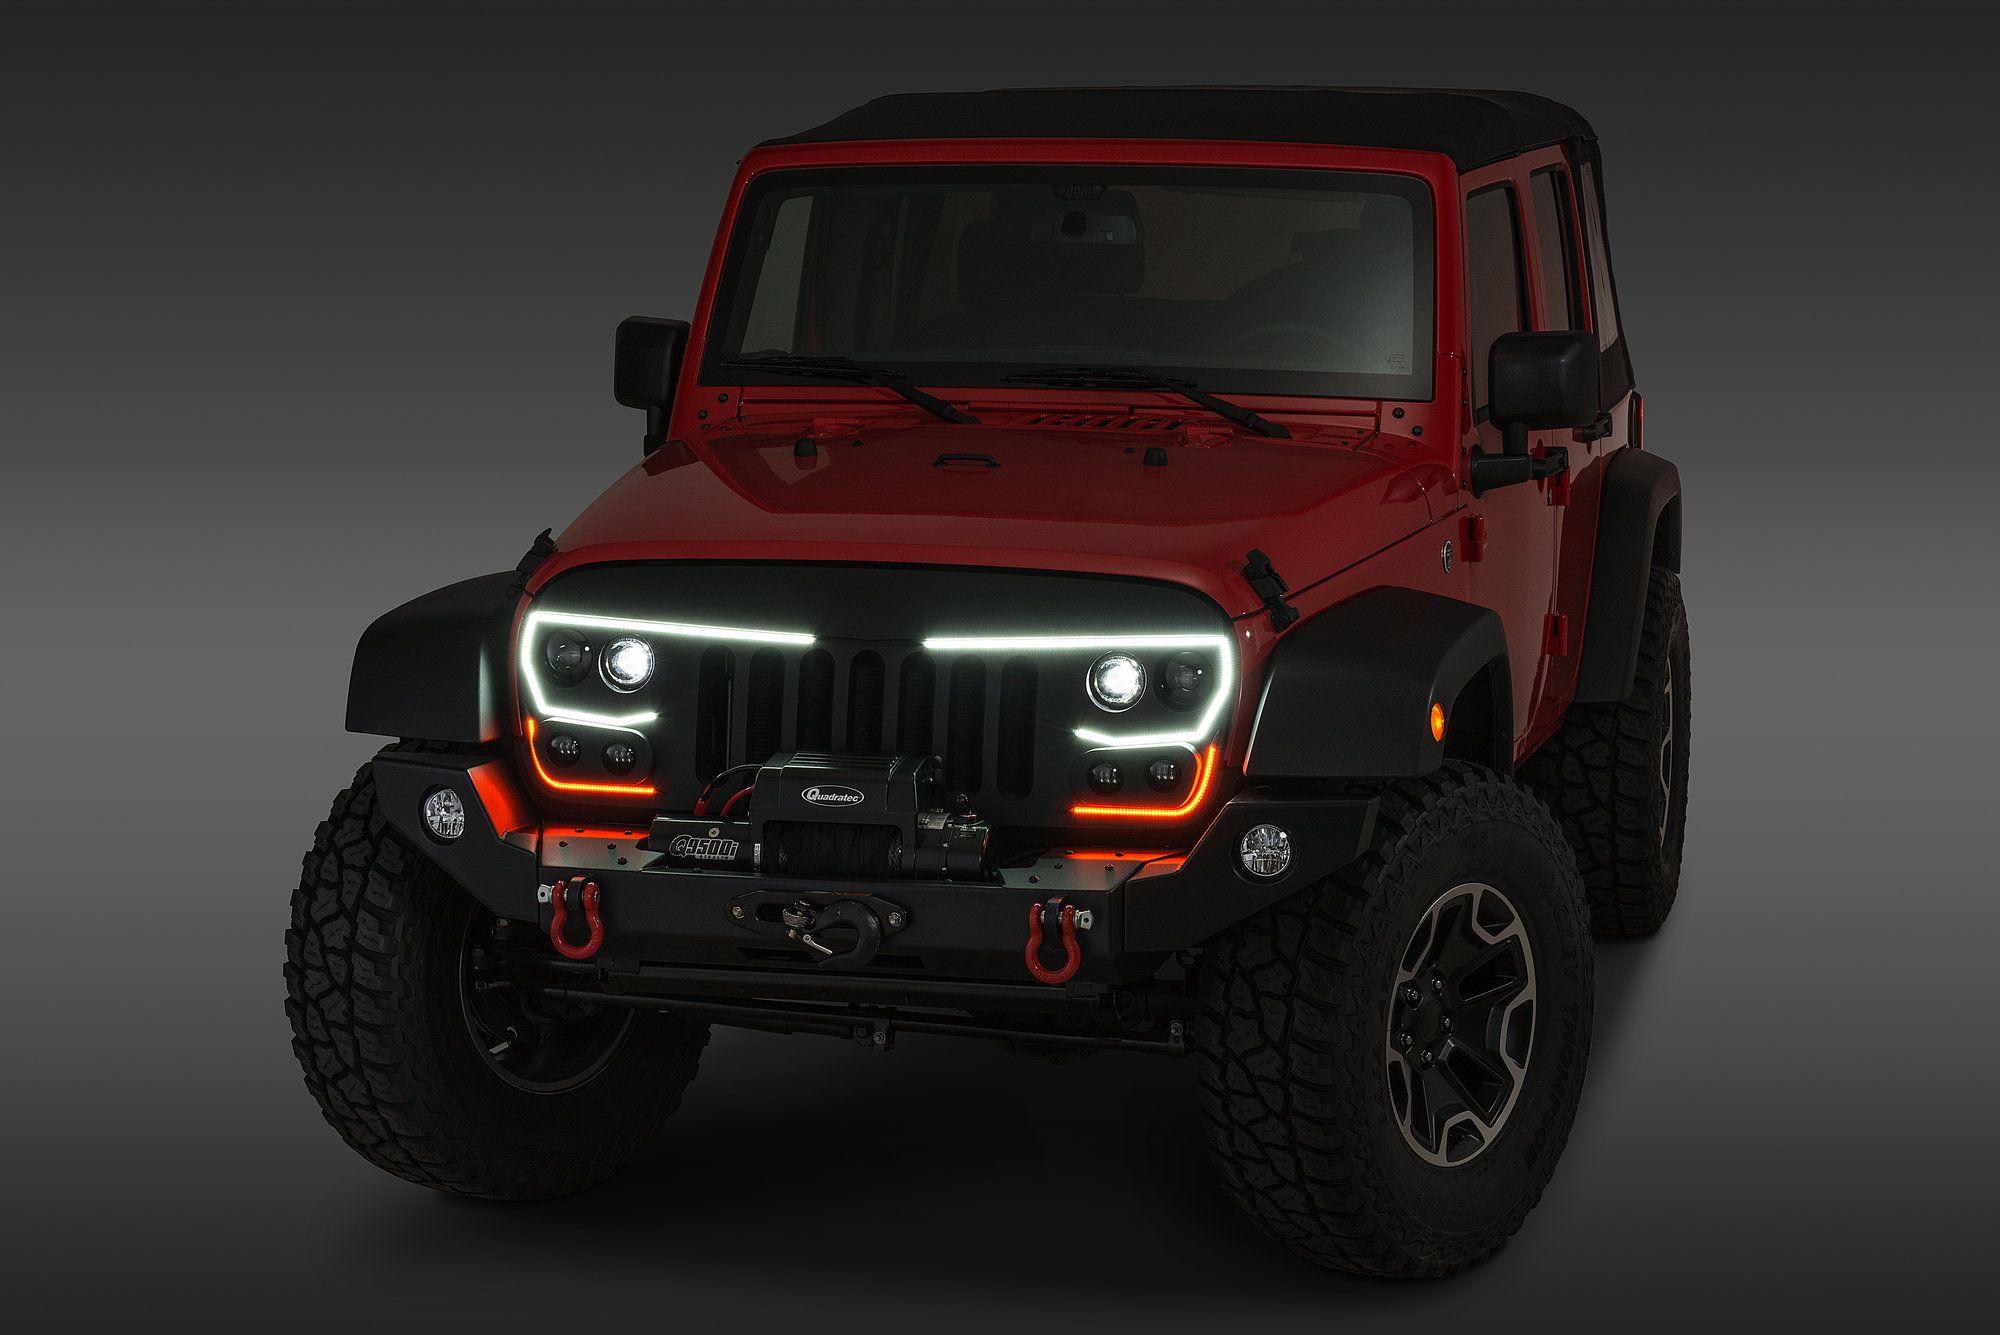 Jeep JK Grill Logo - Oracle Lighting 5817 504 Vector Grill For 07 18 Jeep Wrangler JK